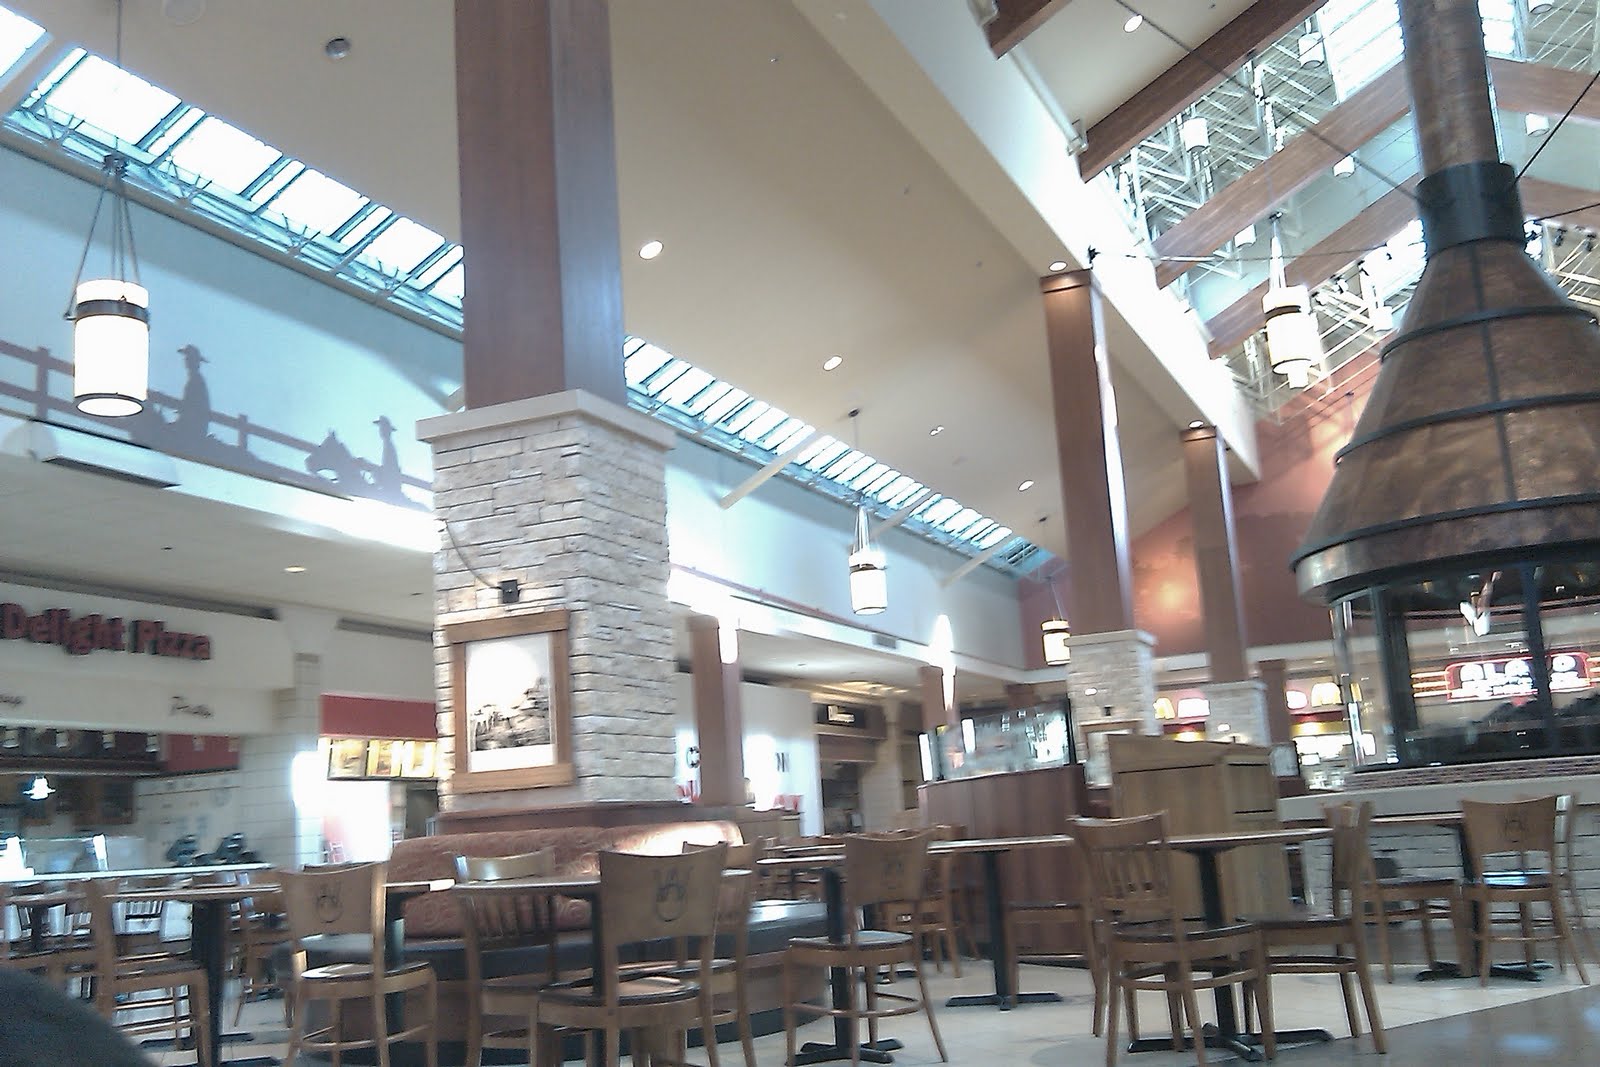 ... and Texas Southern Malls and Retail: West Oaks Mall Jul 2011 Update